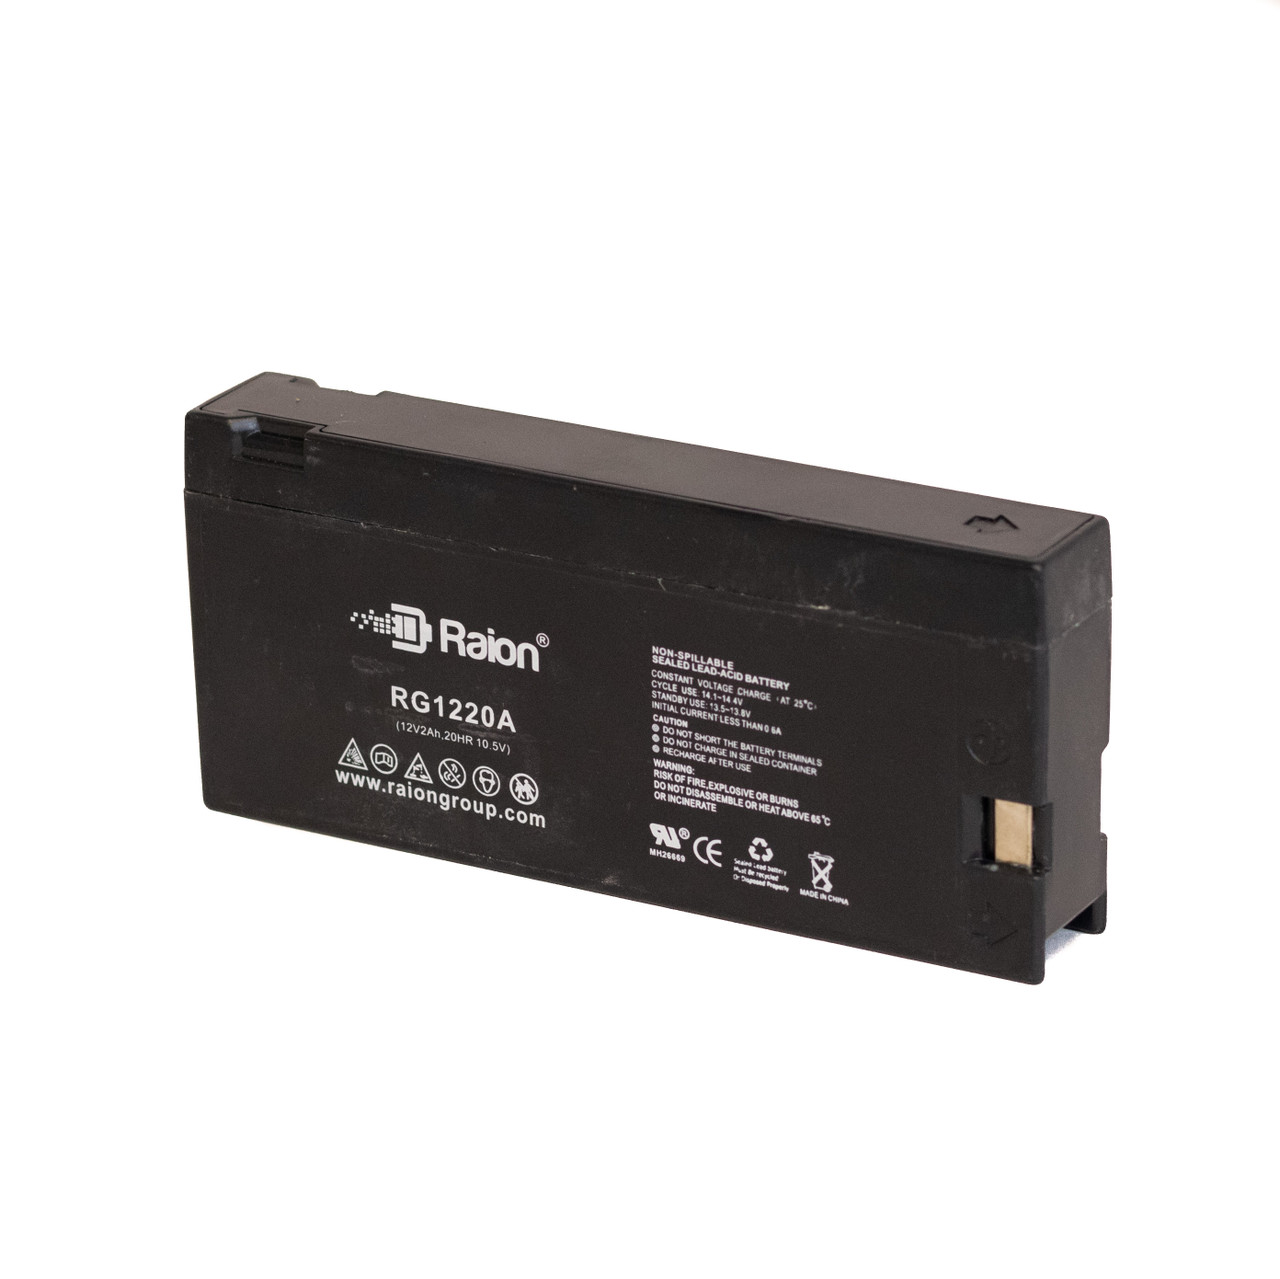 Raion Power RG1220A Replacement Battery for Chinon CV-T63